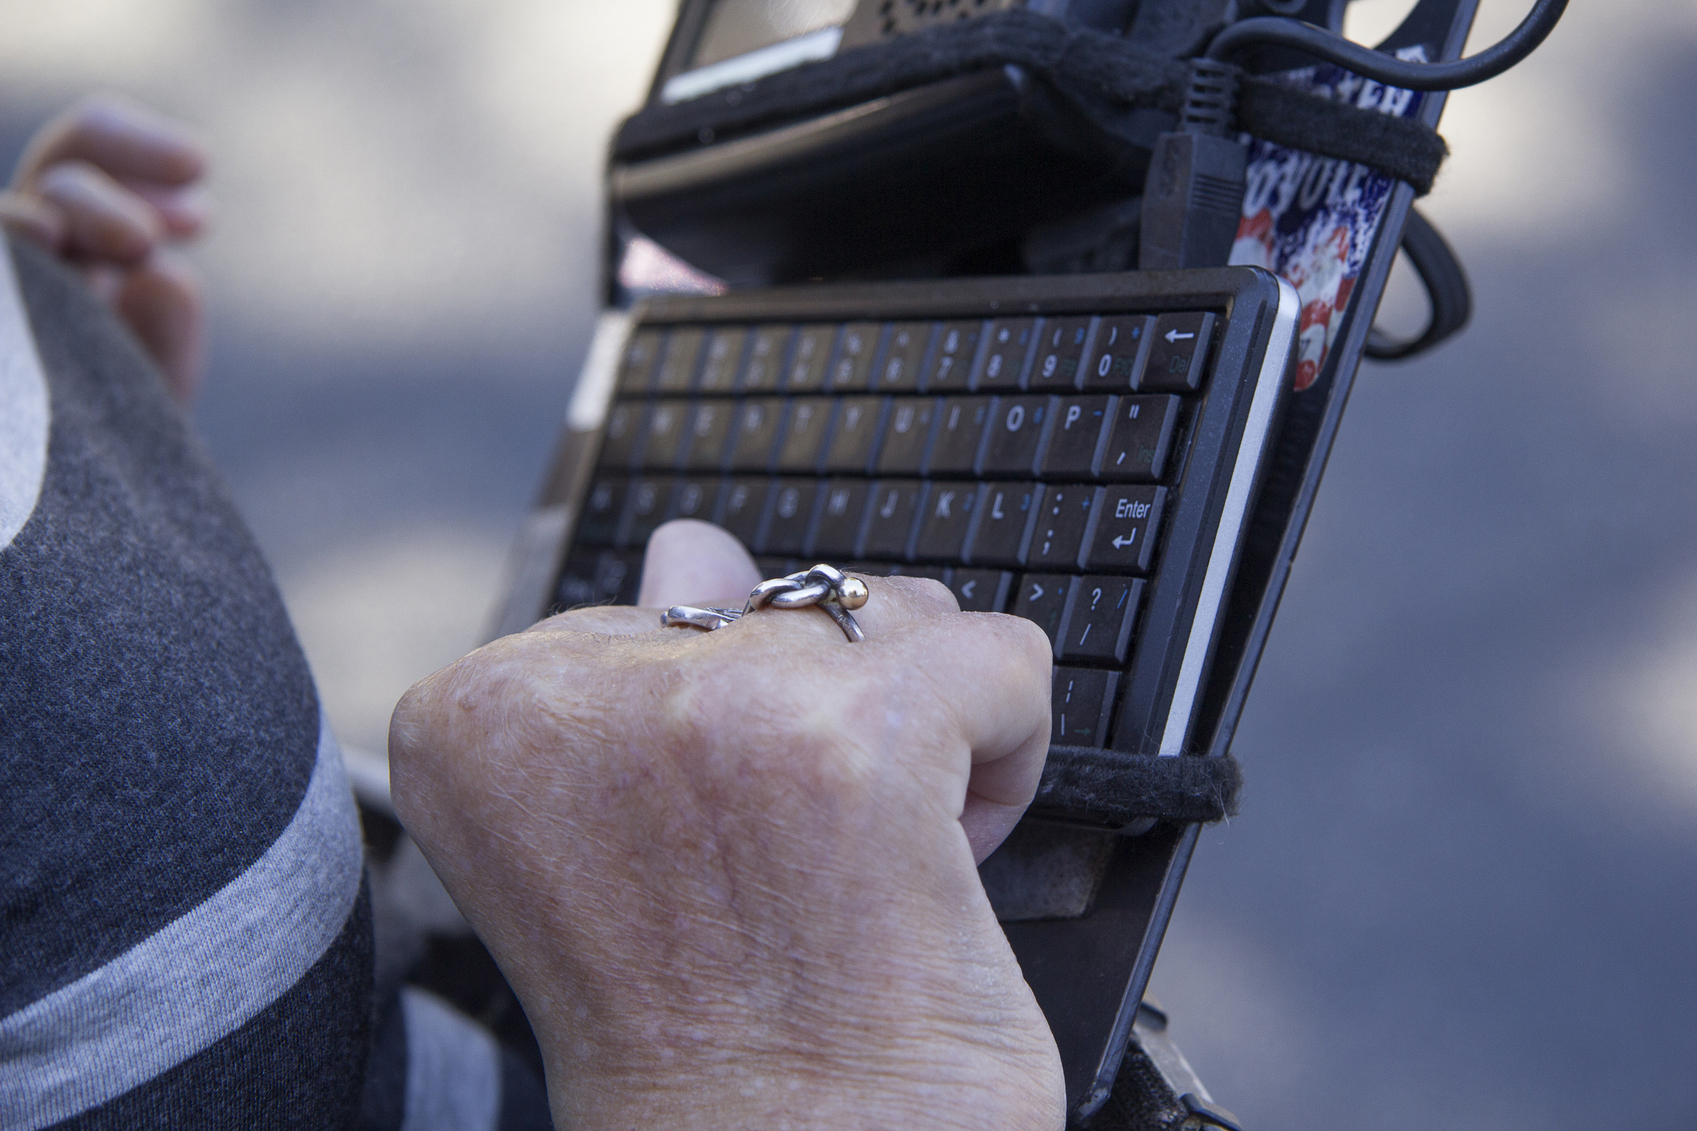 Photo of a hand with folded fingers in front of a keyboard attached to a wheelchair.